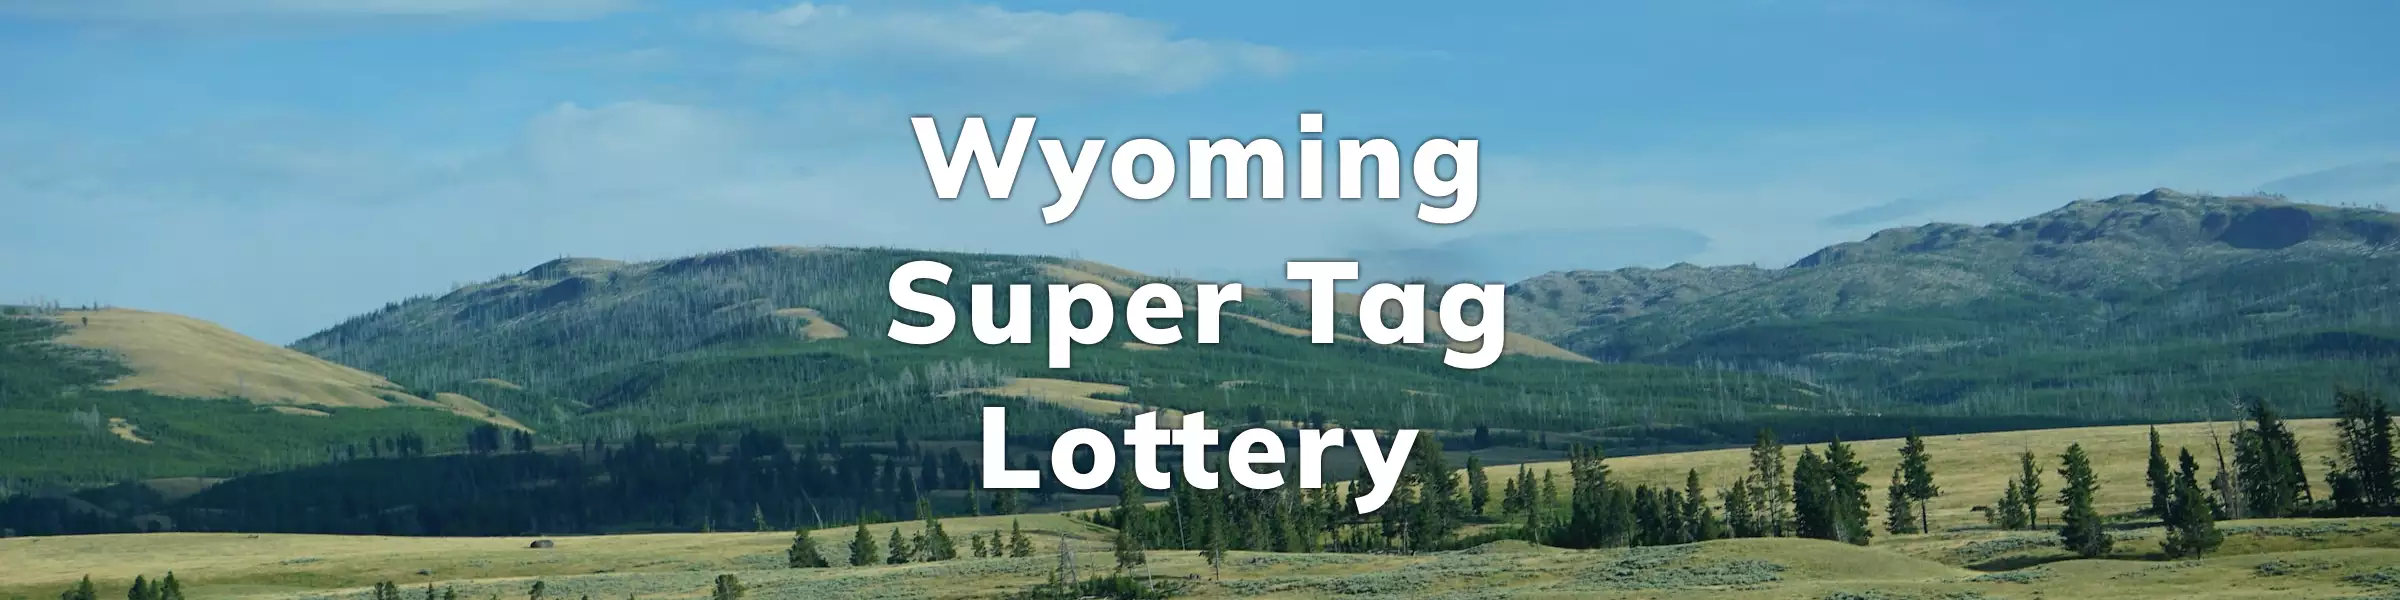 Wyoming Super Tag Lottery